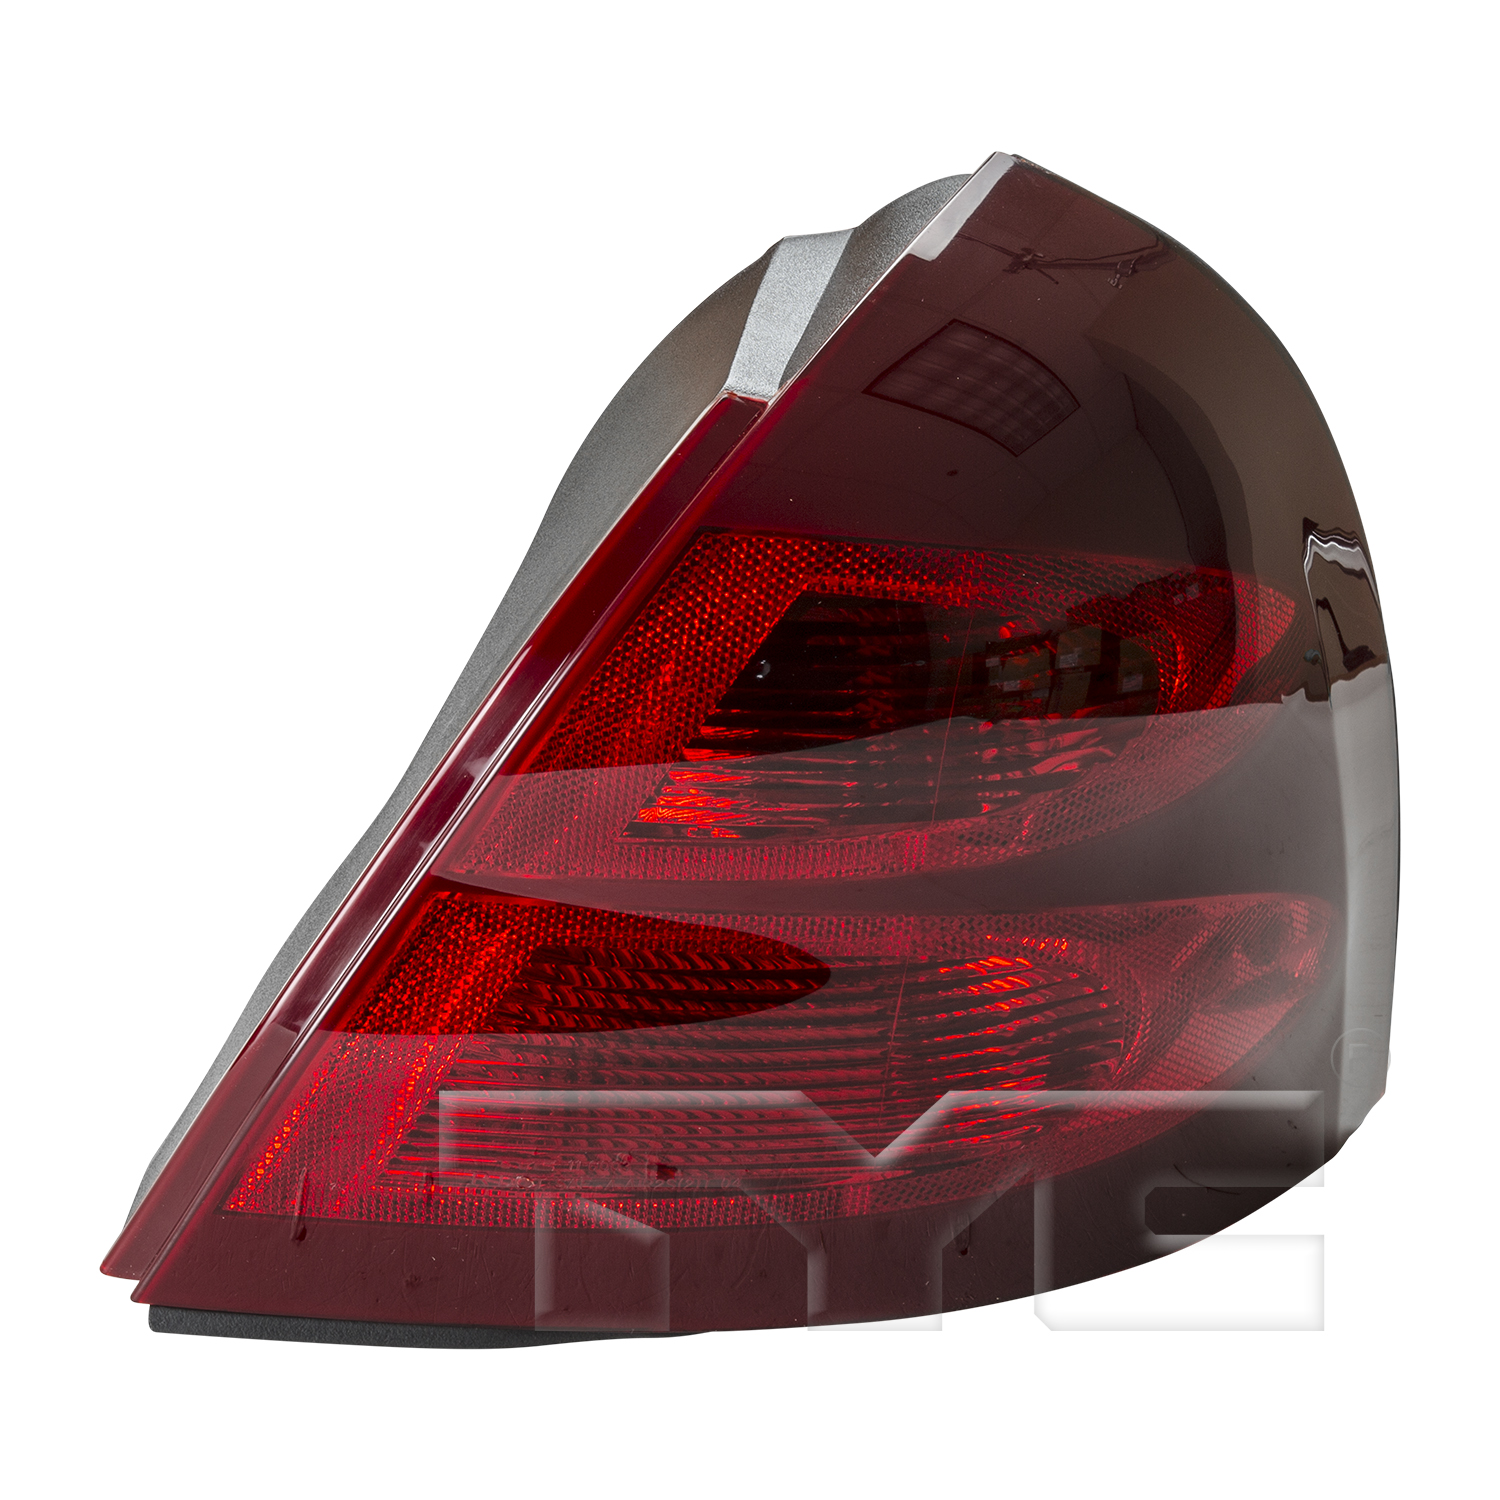 Aftermarket TAILLIGHTS for PONTIAC - GRAND PRIX, GRAND PRIX,04-08,RT Taillamp assy